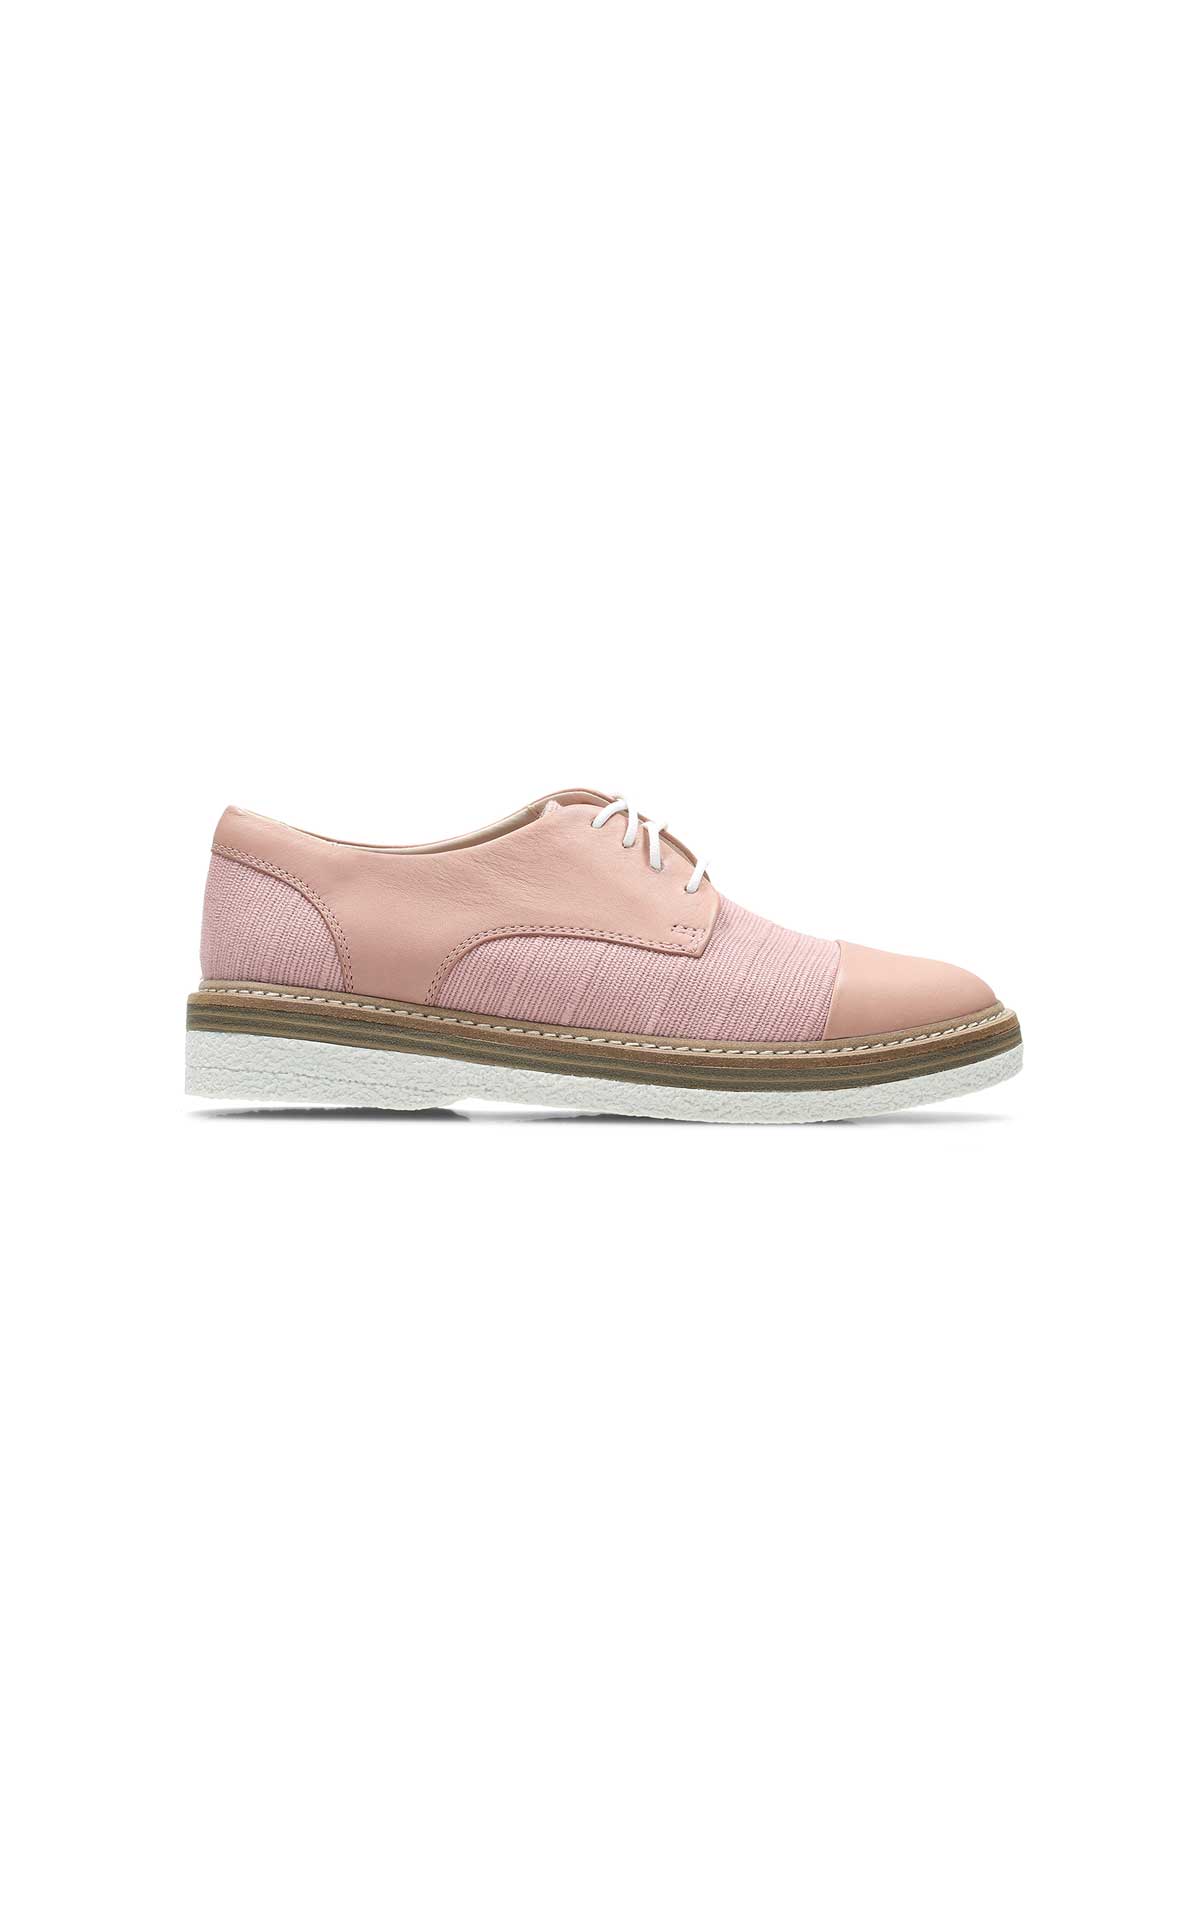 clarks canada online shopping